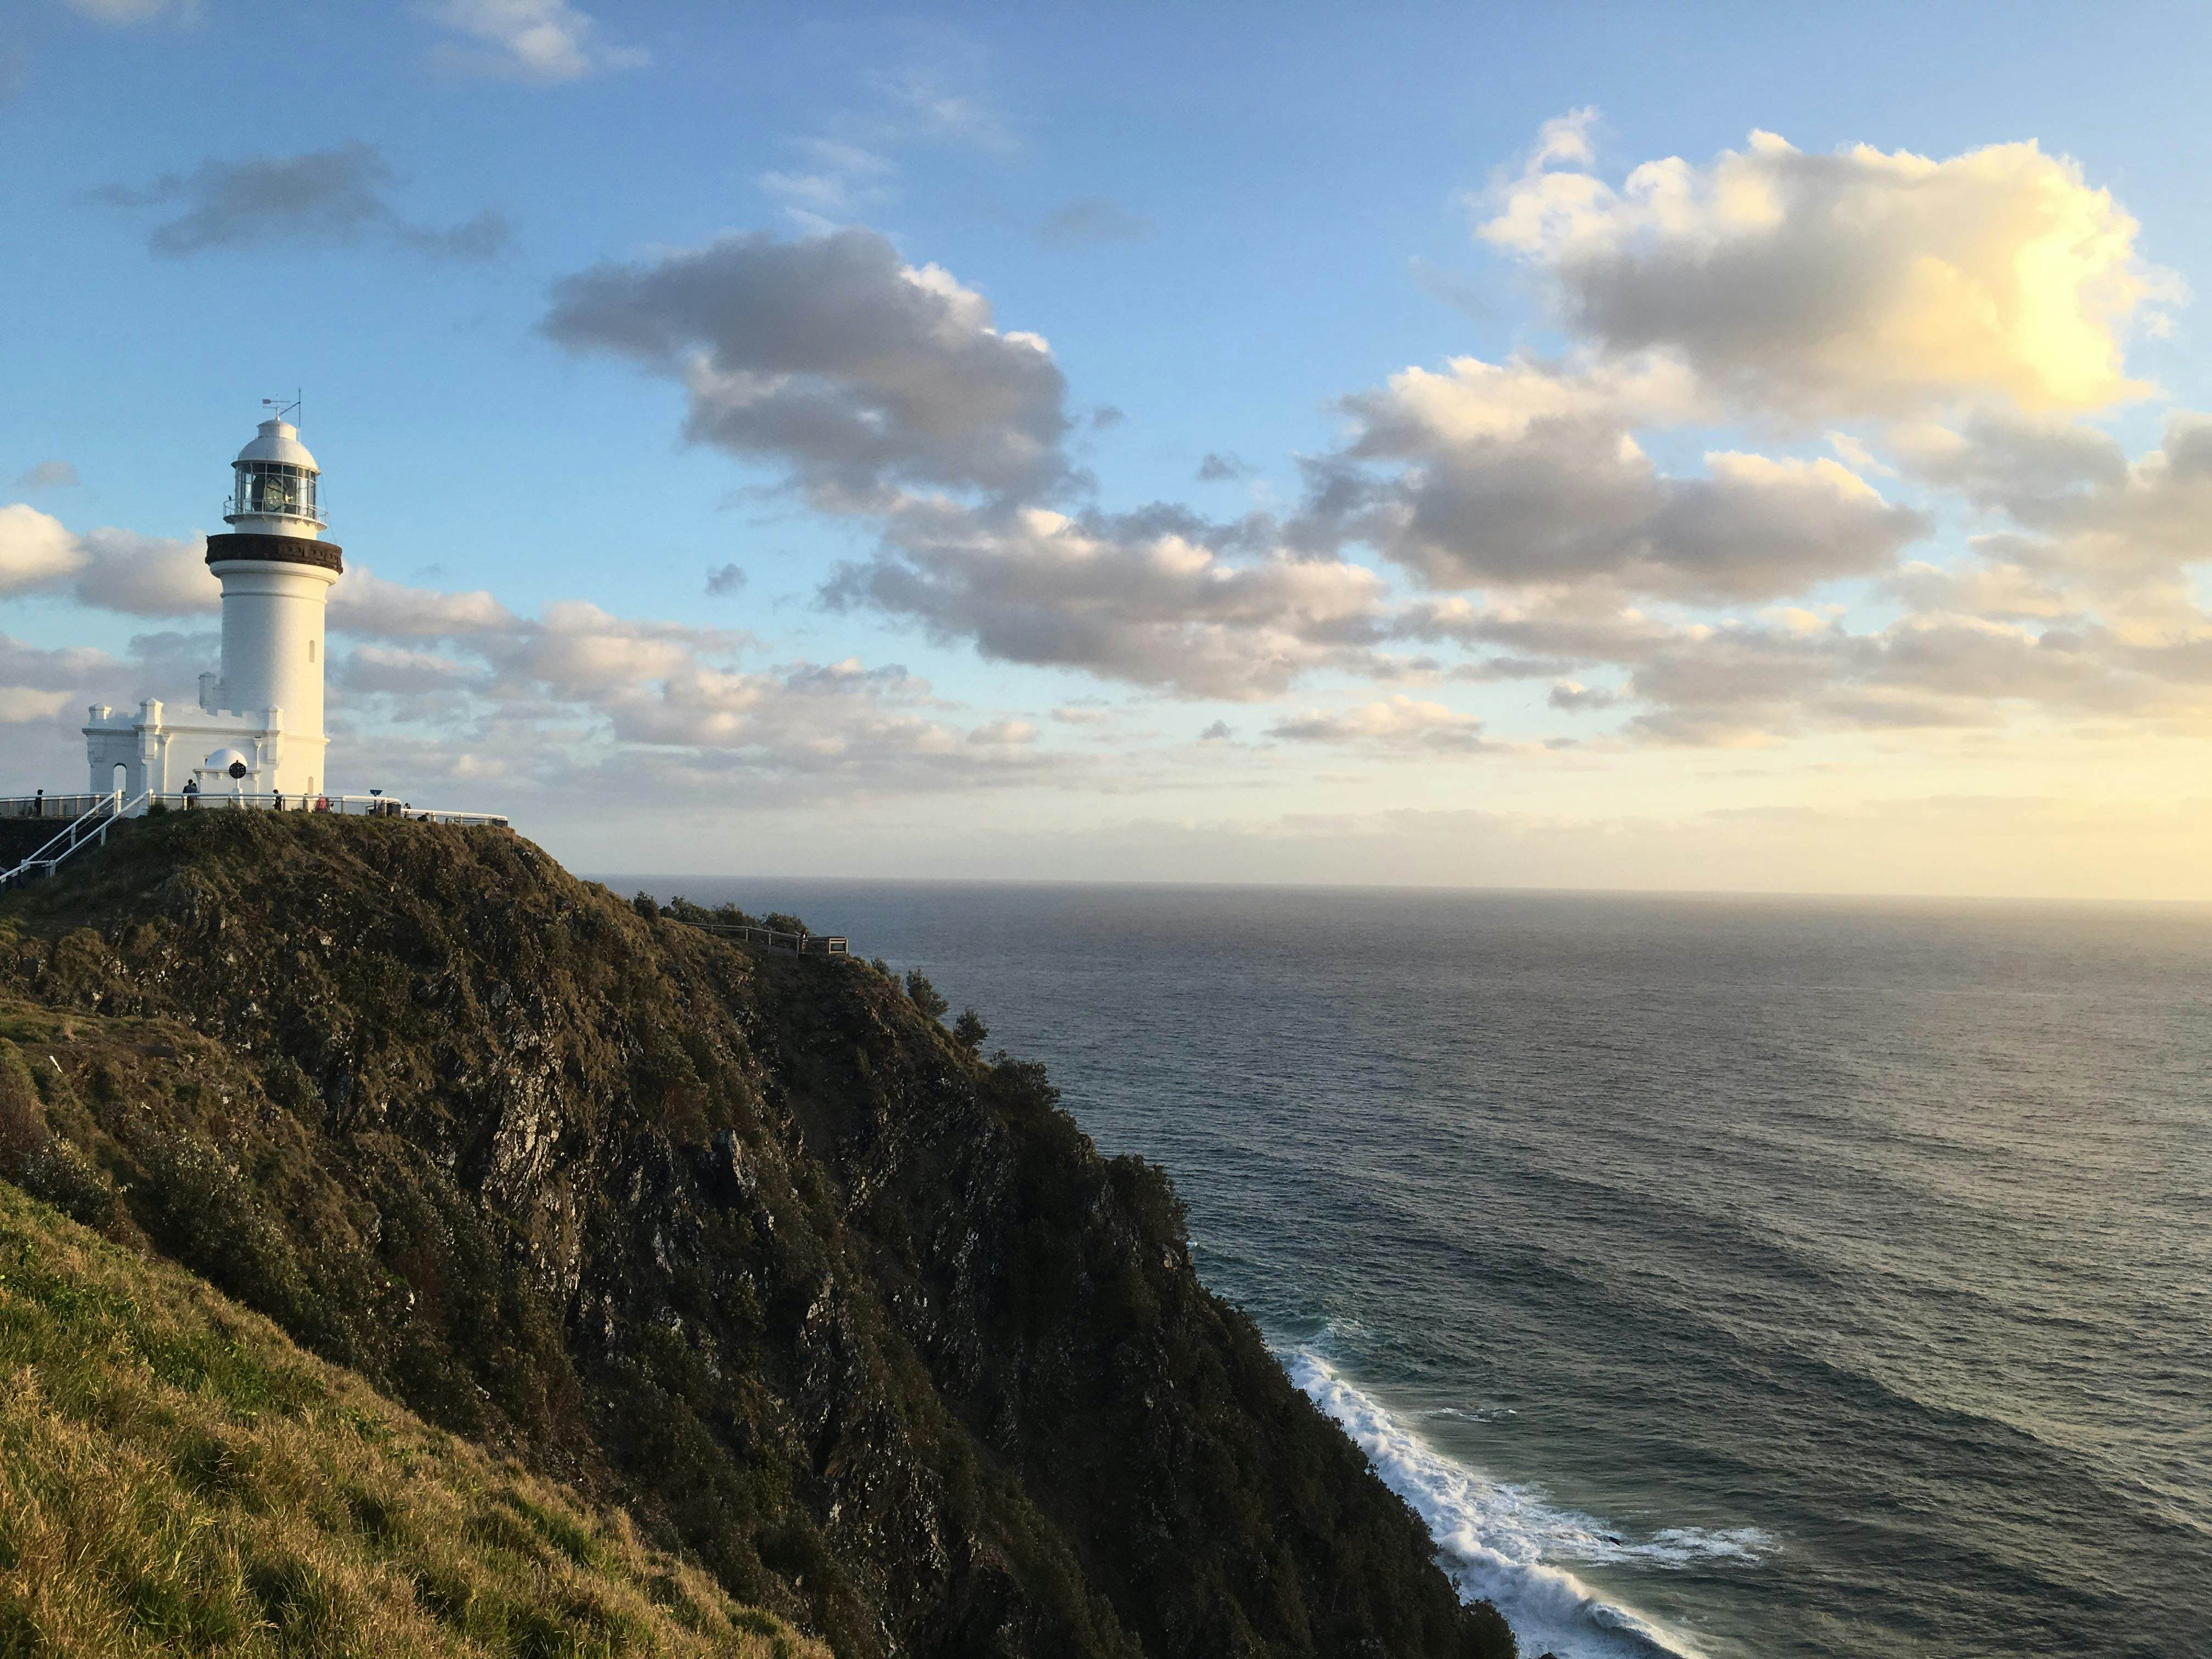 Byron Bay travel - Lonely Planet